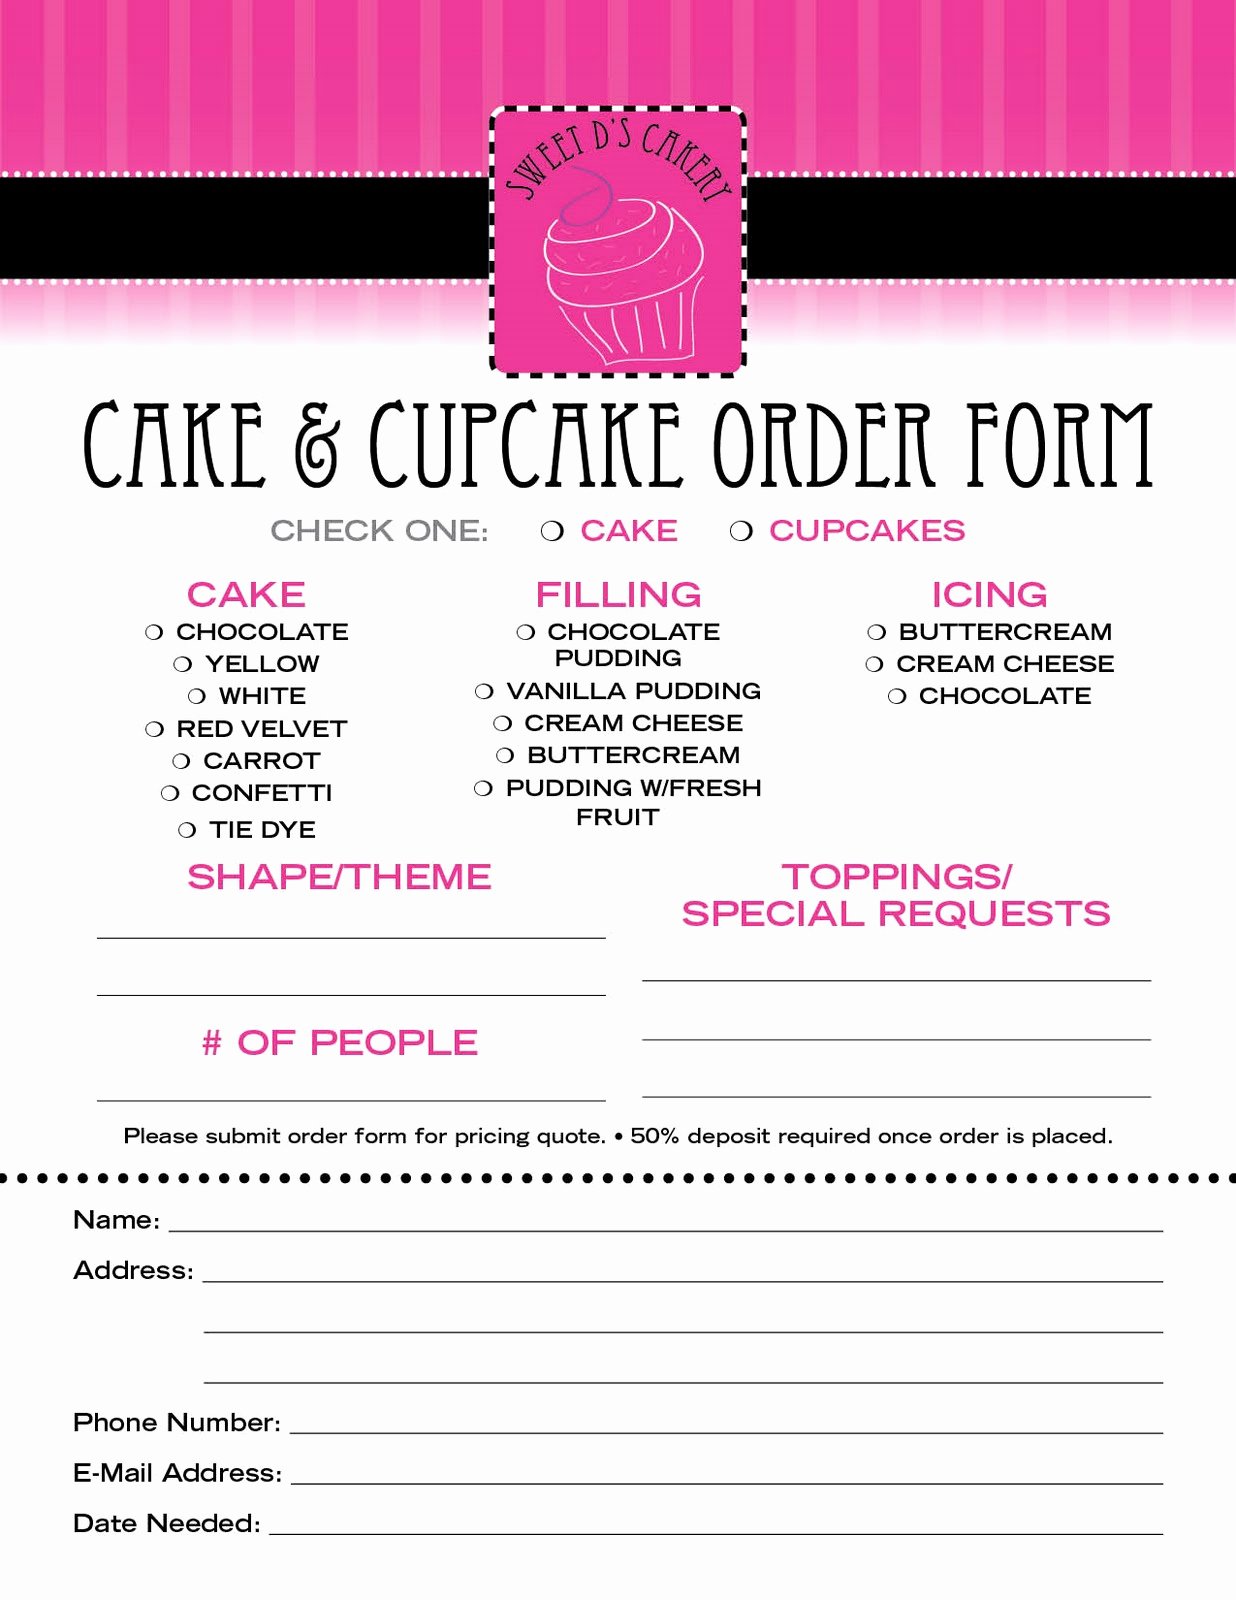 Cake order forms Templates Elegant Sweet D S Cakery Download Our order form Here